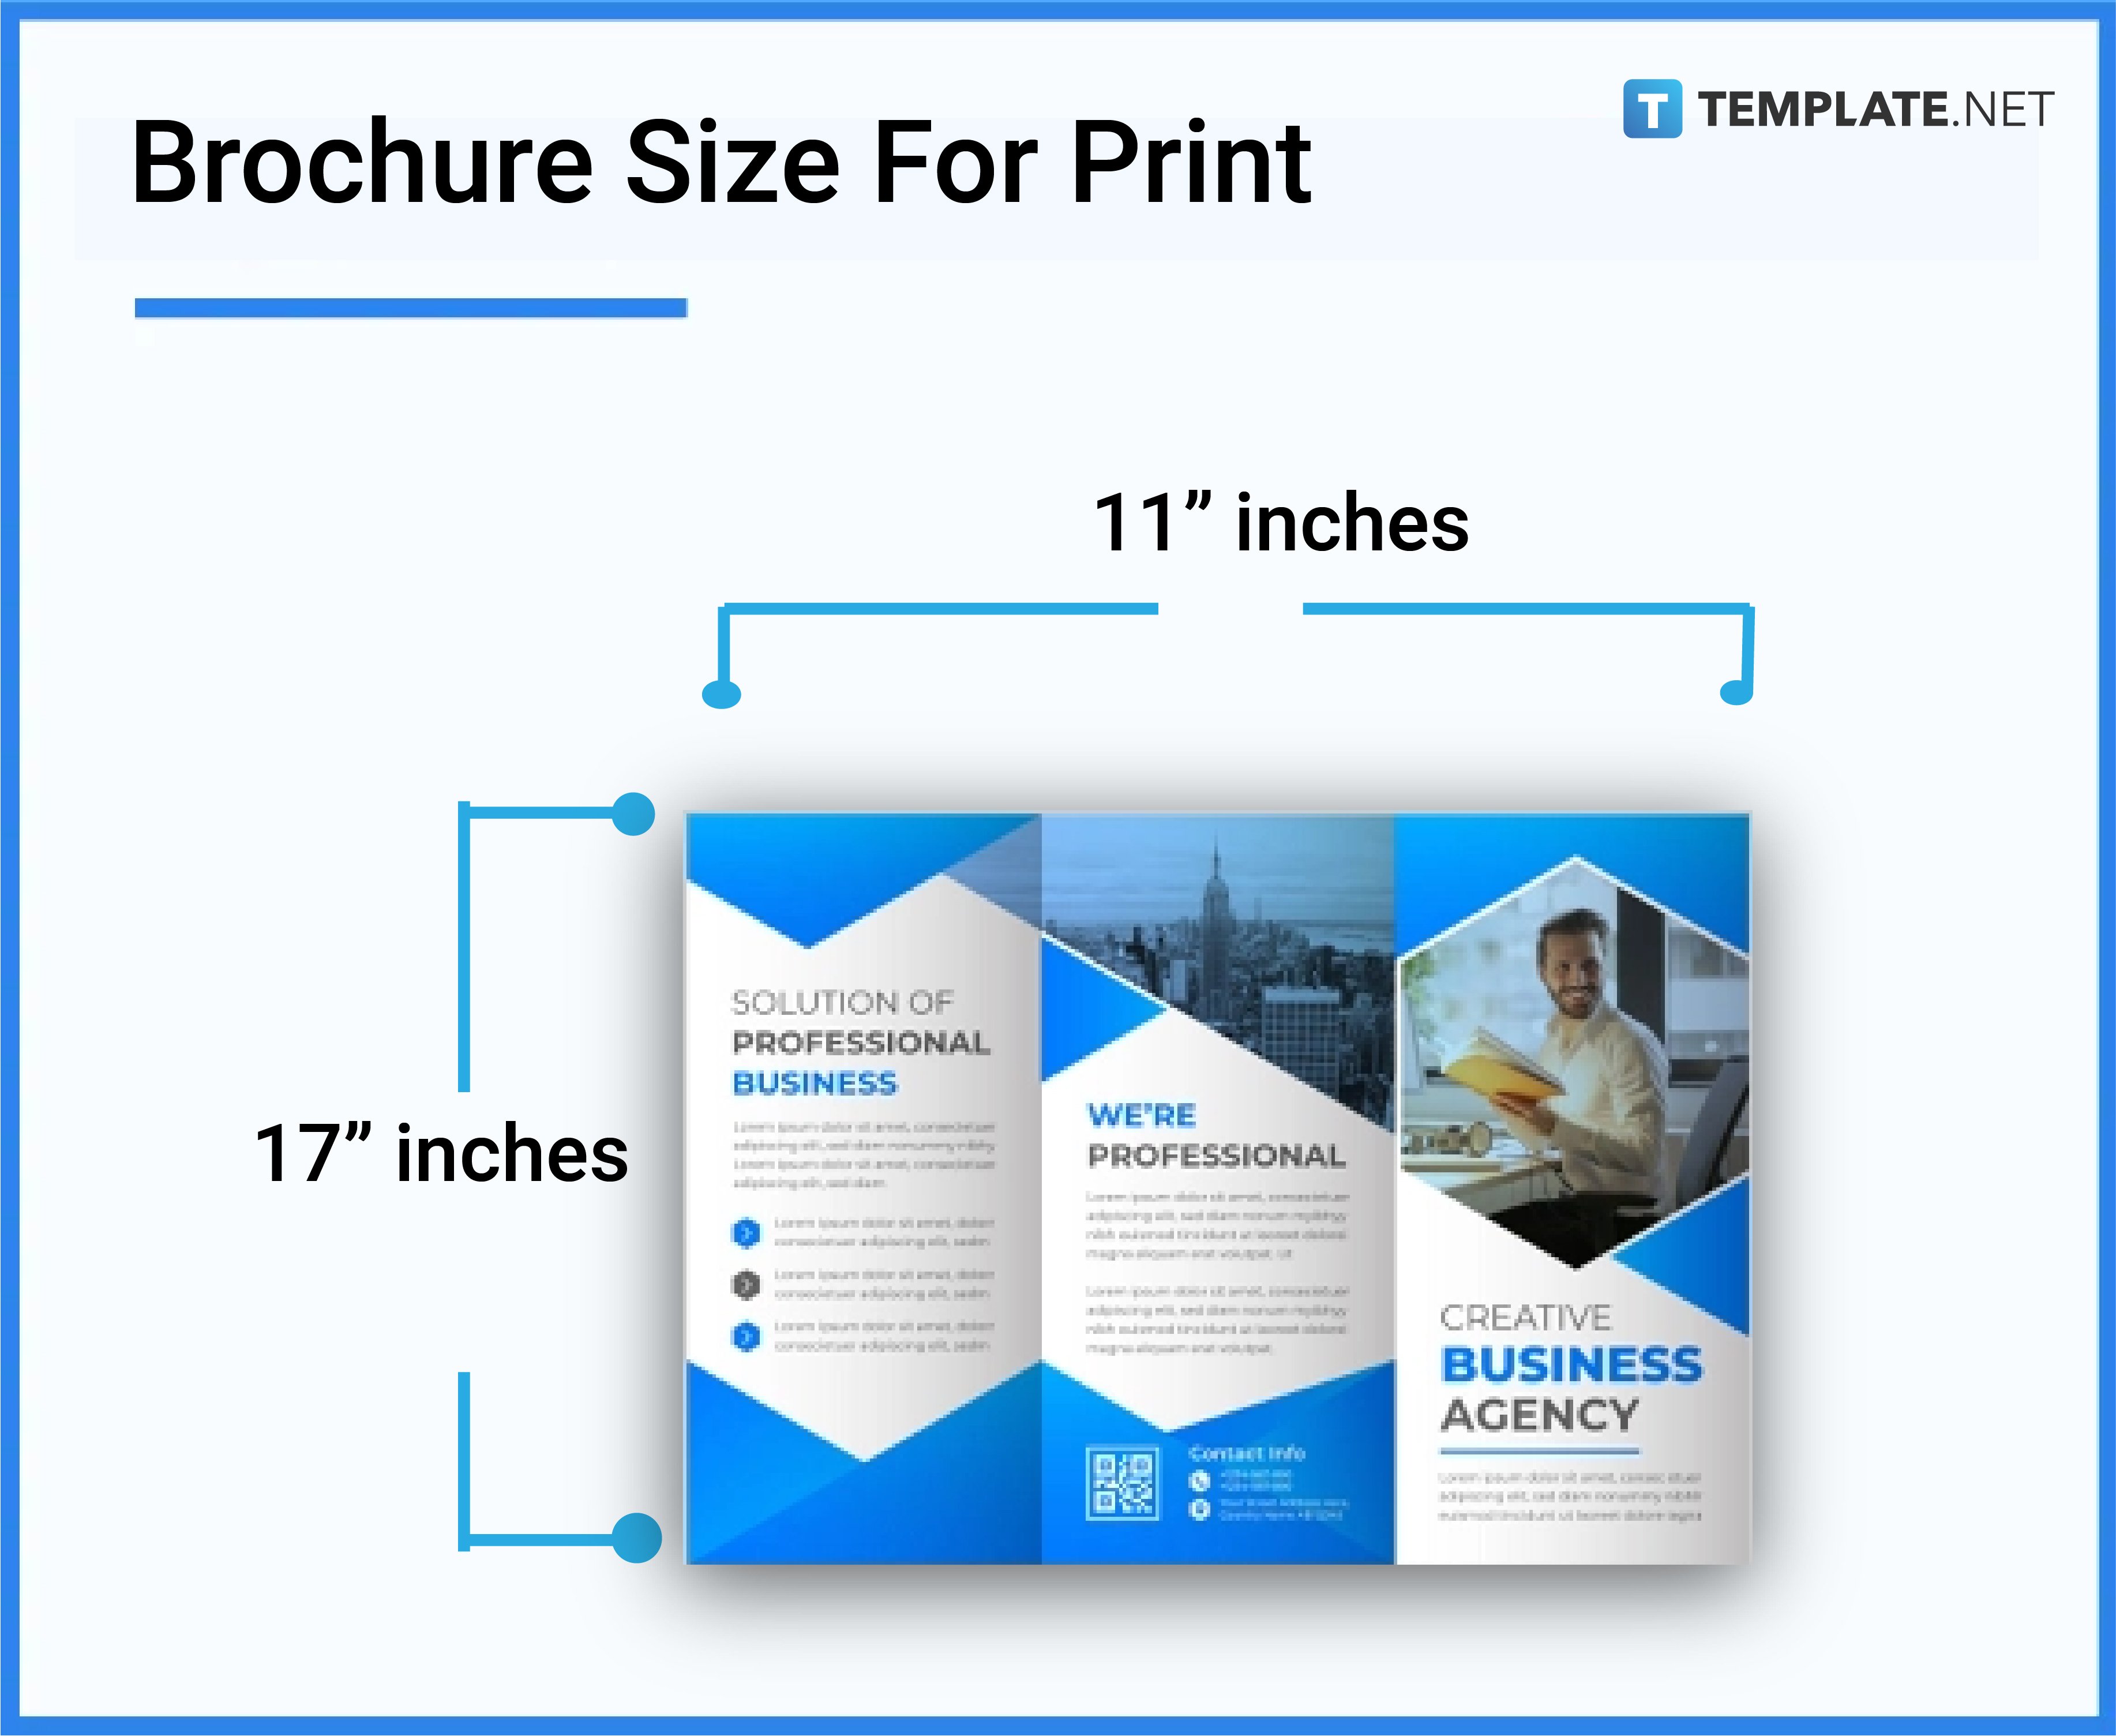 brochure-size-for-print